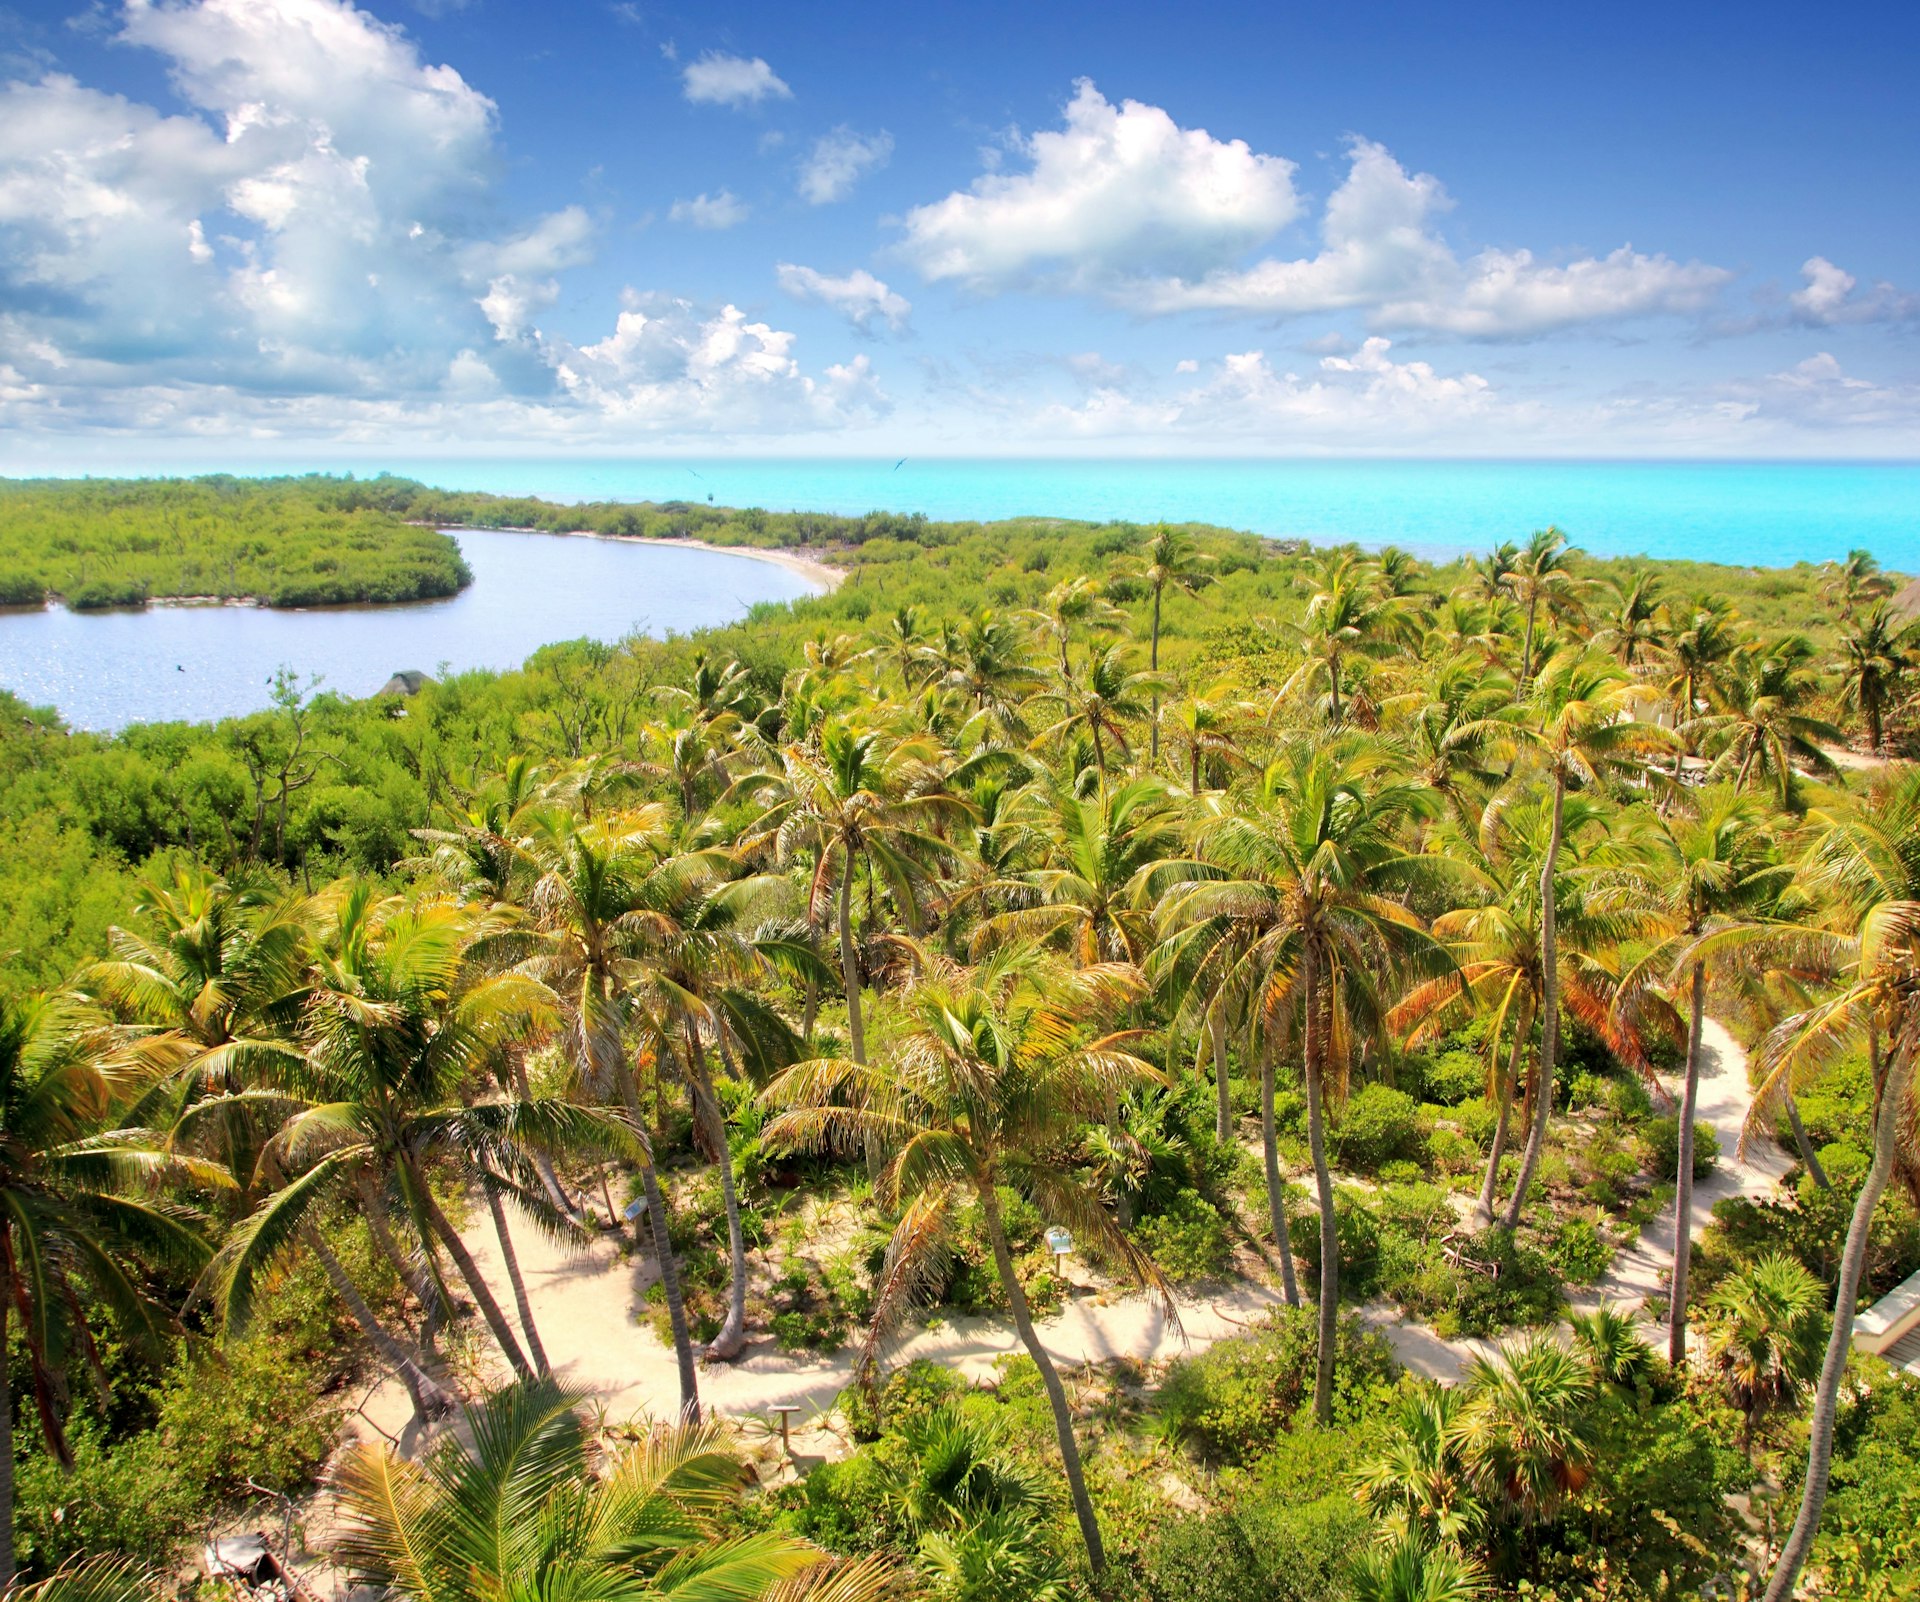 Aerial shot of a tropical palm-covered island with a few sandy paths running through it